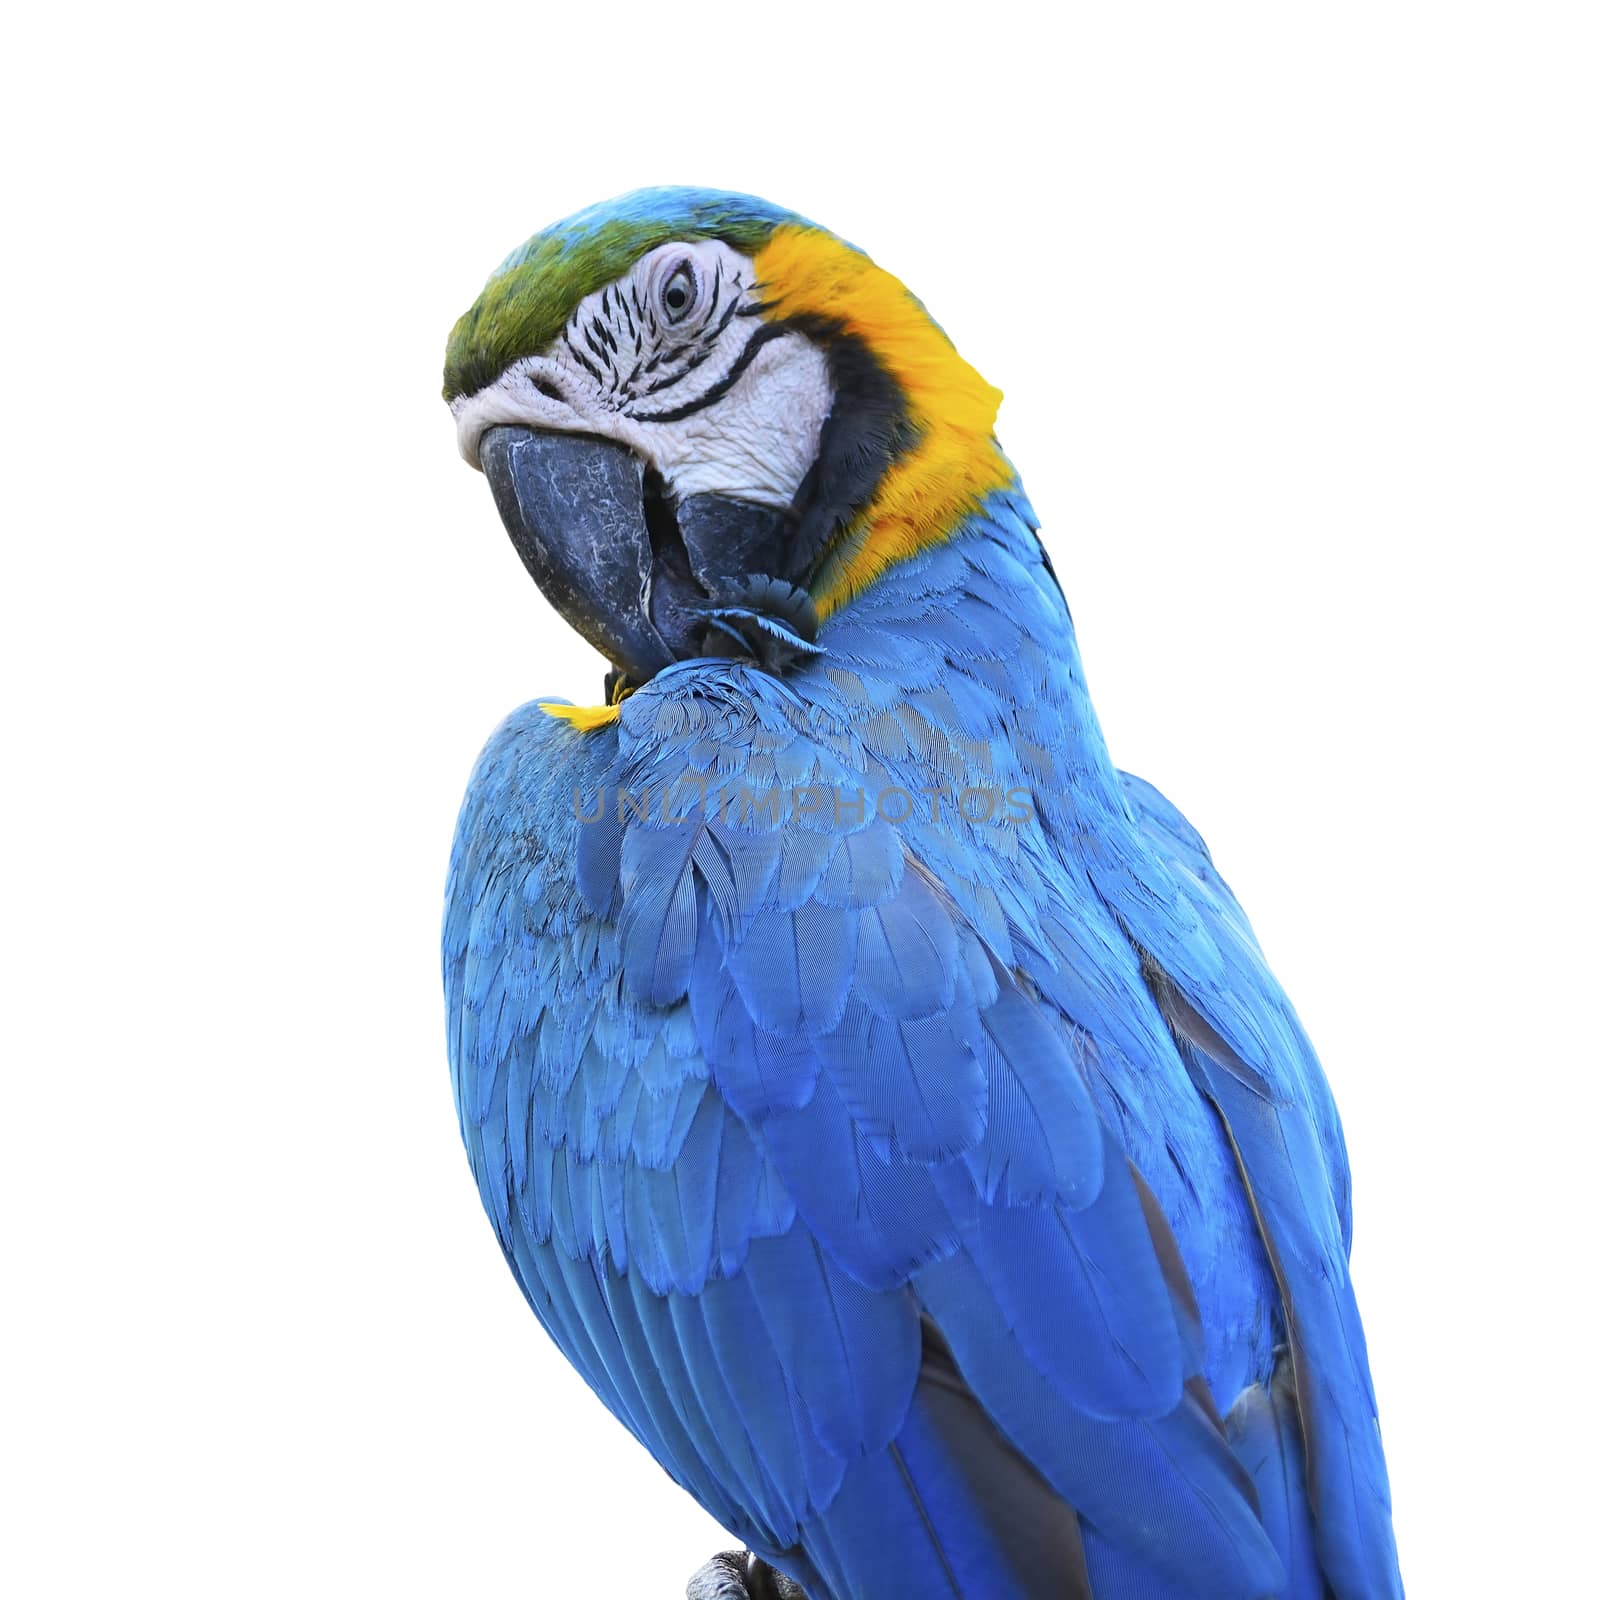 Beautiful parrot bird, Blue and Gold Macaw in portrait profile, isolated on white background